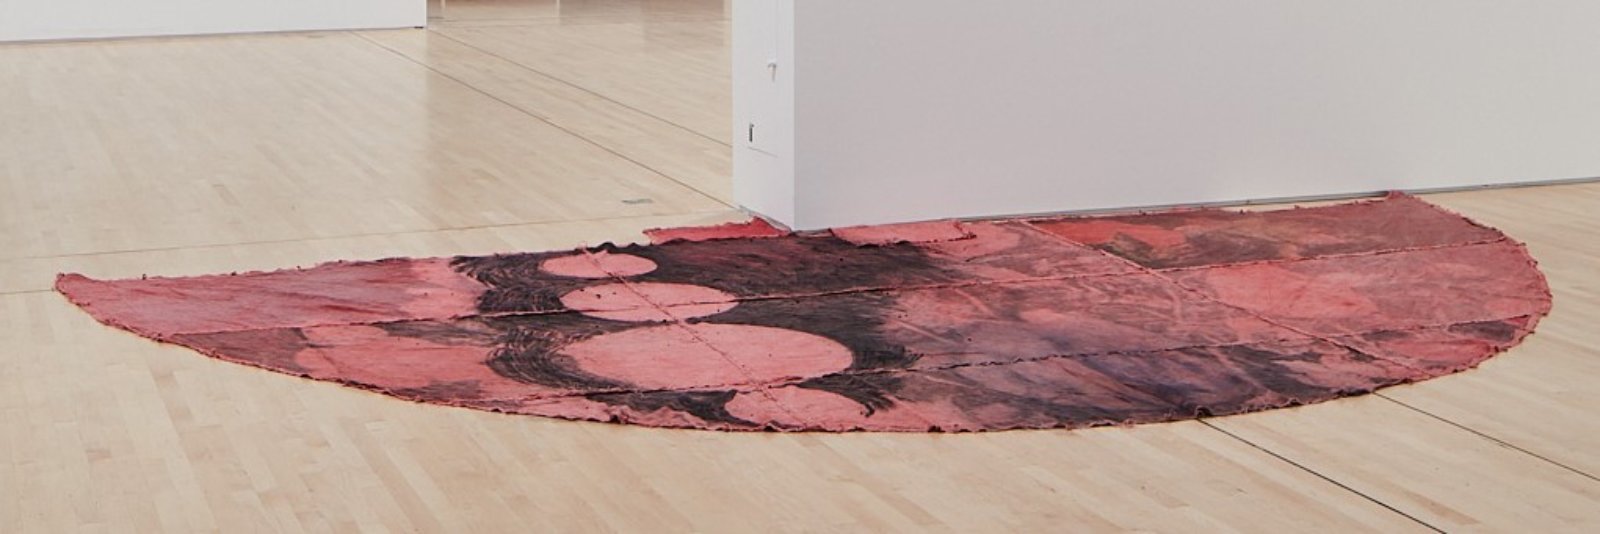 Duane Linklater, can the circle be unbroken 4, 2019, digital print on linen, cup and saucer red dye, indigo dye, charcoal, 120 x 240 in. (305 x 610 cm). Installation view, SOFT POWER, SF MOMA, San Francisco, USA, 2019